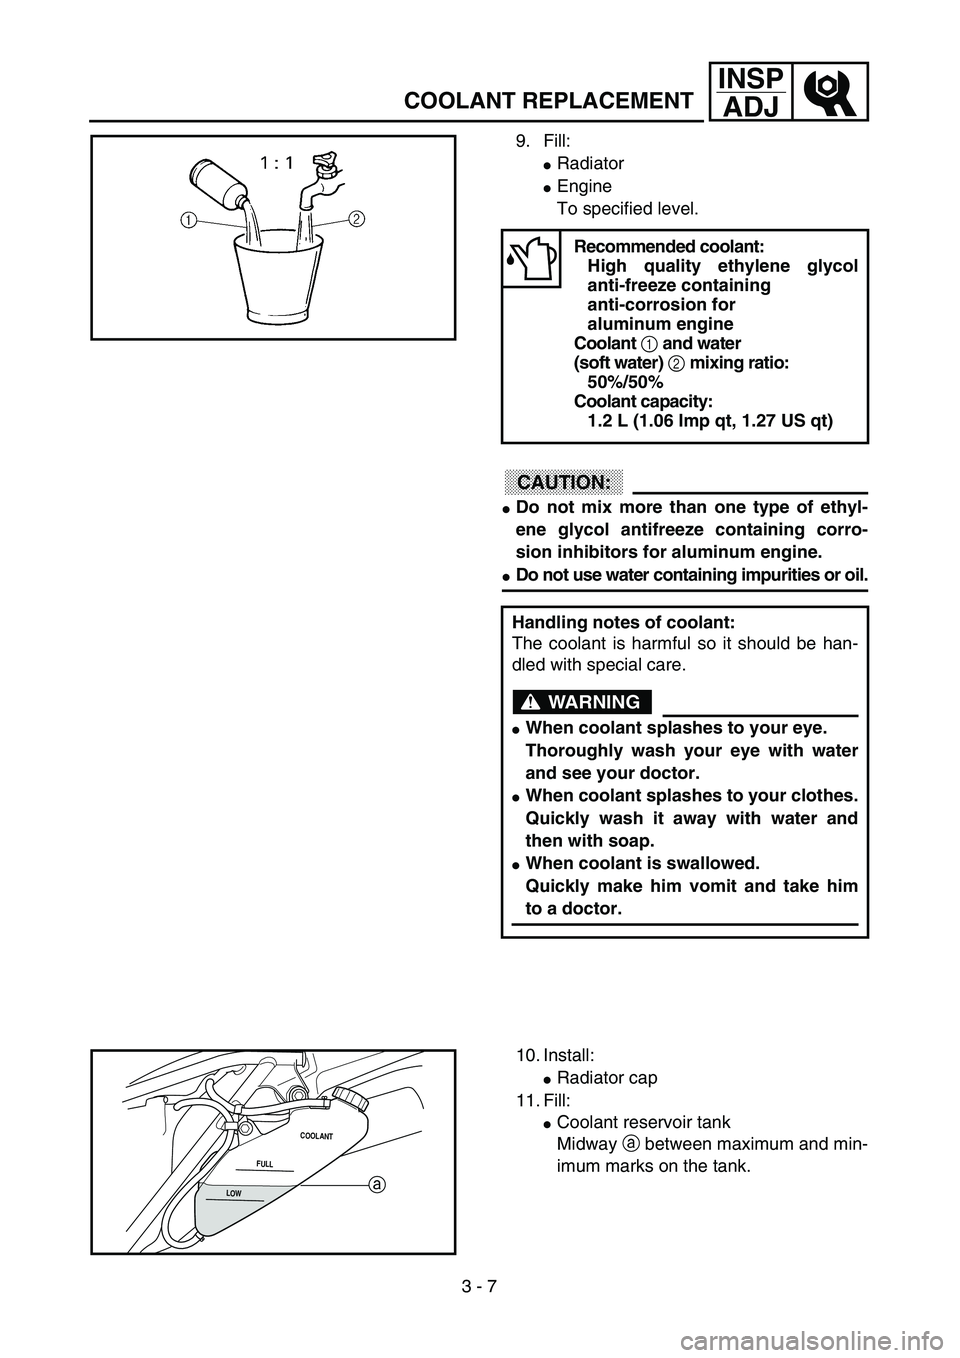 YAMAHA WR 426F 2002  Owners Manual 3 - 7
INSP
ADJ
COOLANT REPLACEMENT
9. Fill:
Radiator
Engine
To specified level.
CAUTION:
Do not mix more than one type of ethyl-
ene glycol antifreeze containing corro-
sion inhibitors for aluminum